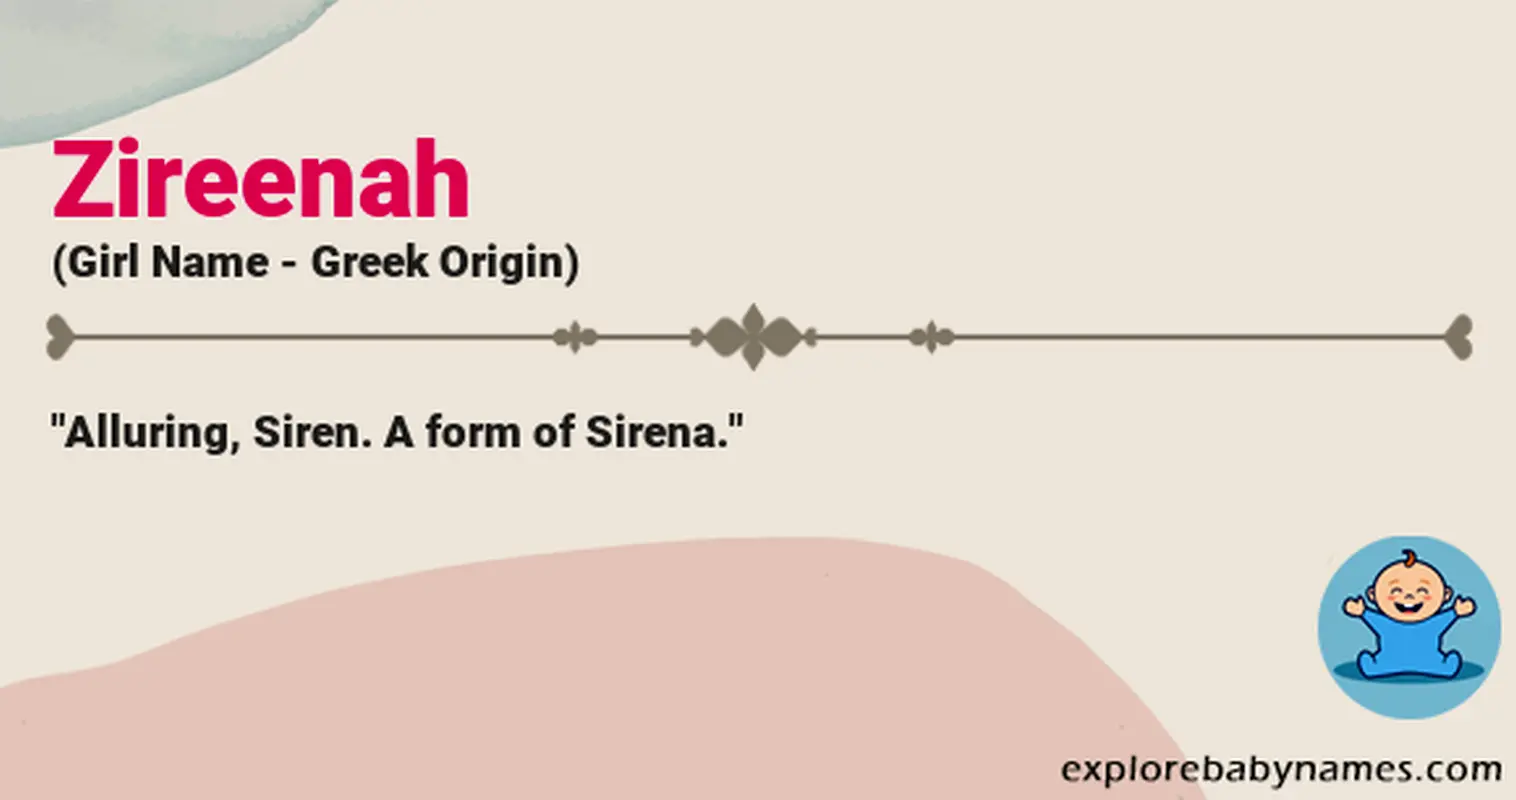 Meaning of Zireenah